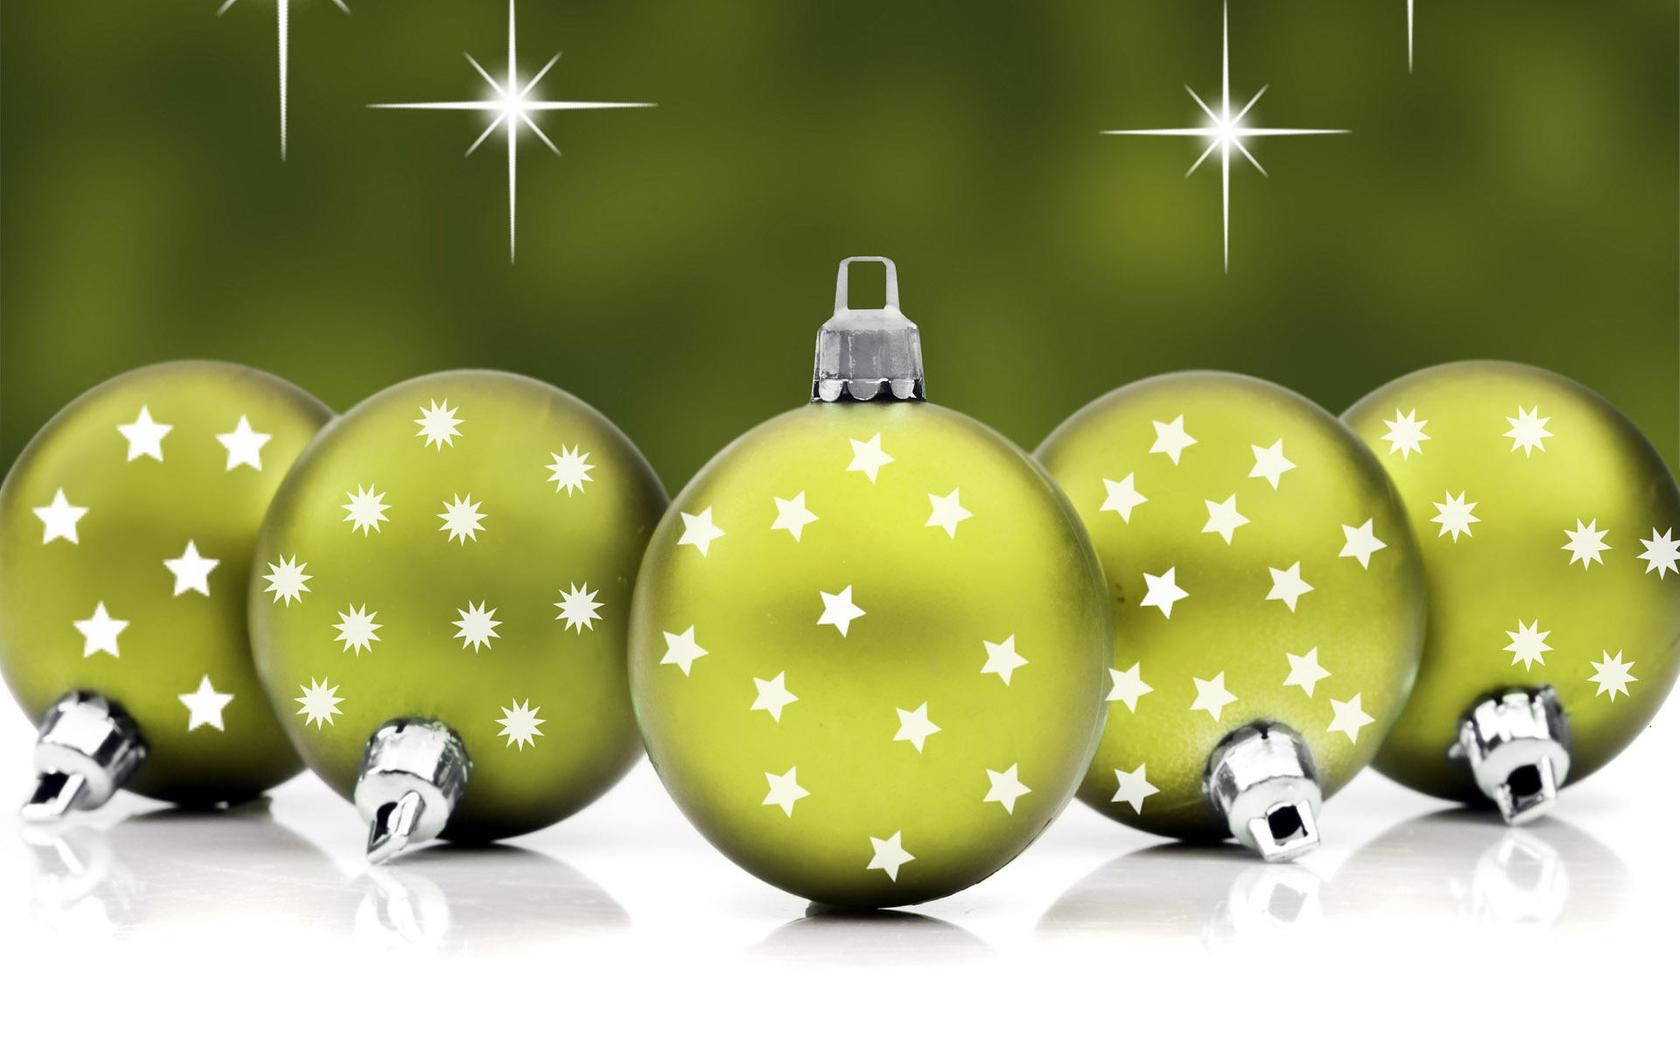 Green Christmas balls full with stars winter holiday